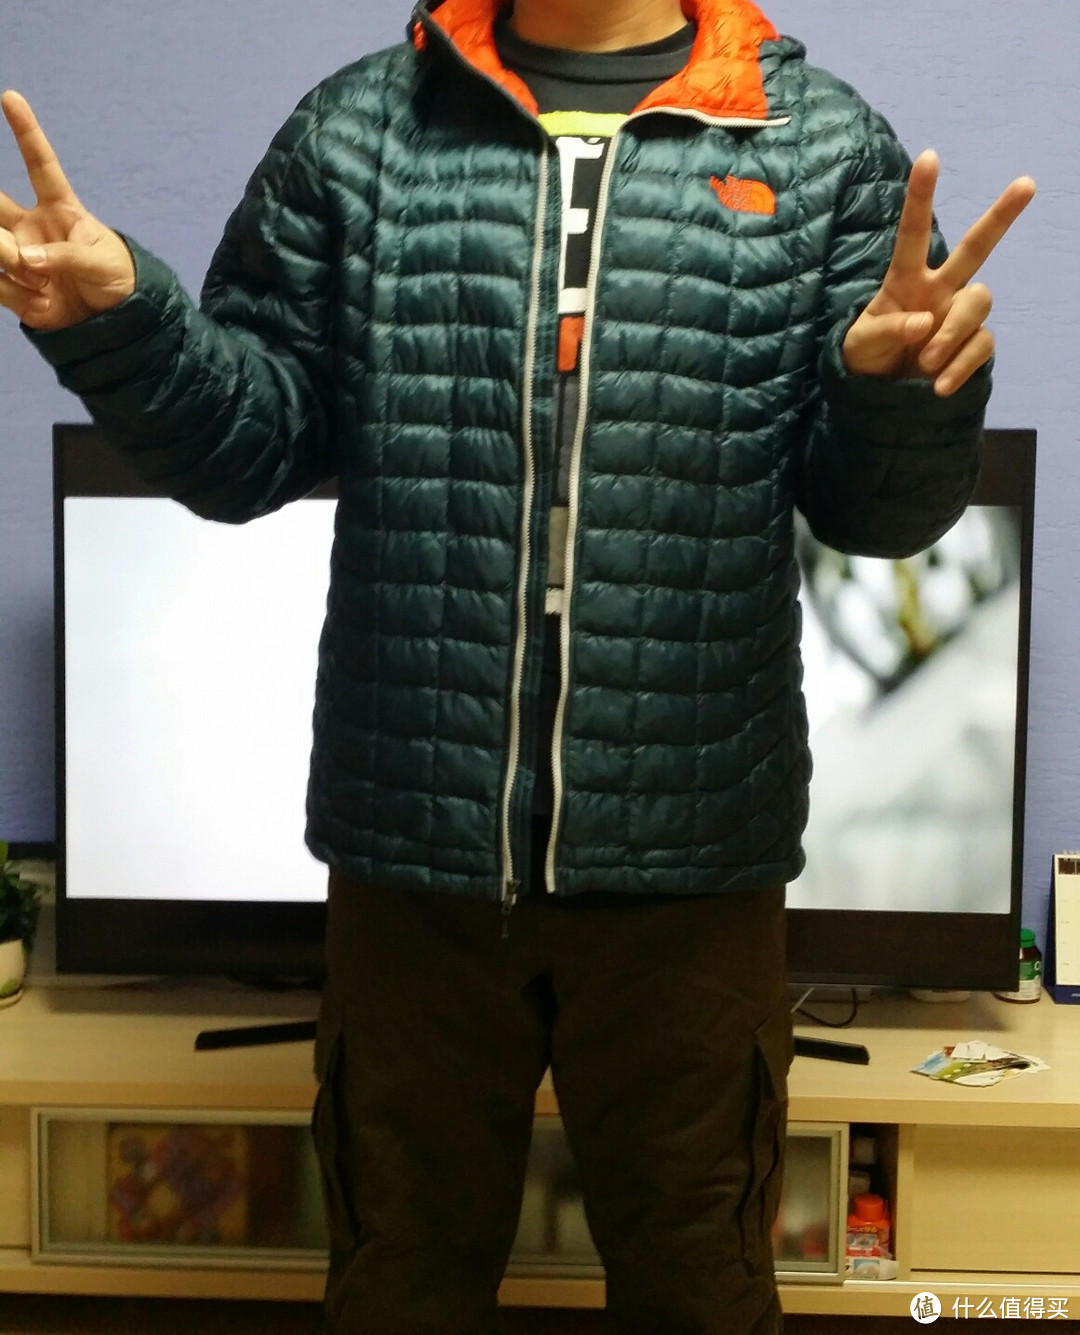 The North Face ThermoBall™ Hoodie北脸新技术的有帽子的棉服